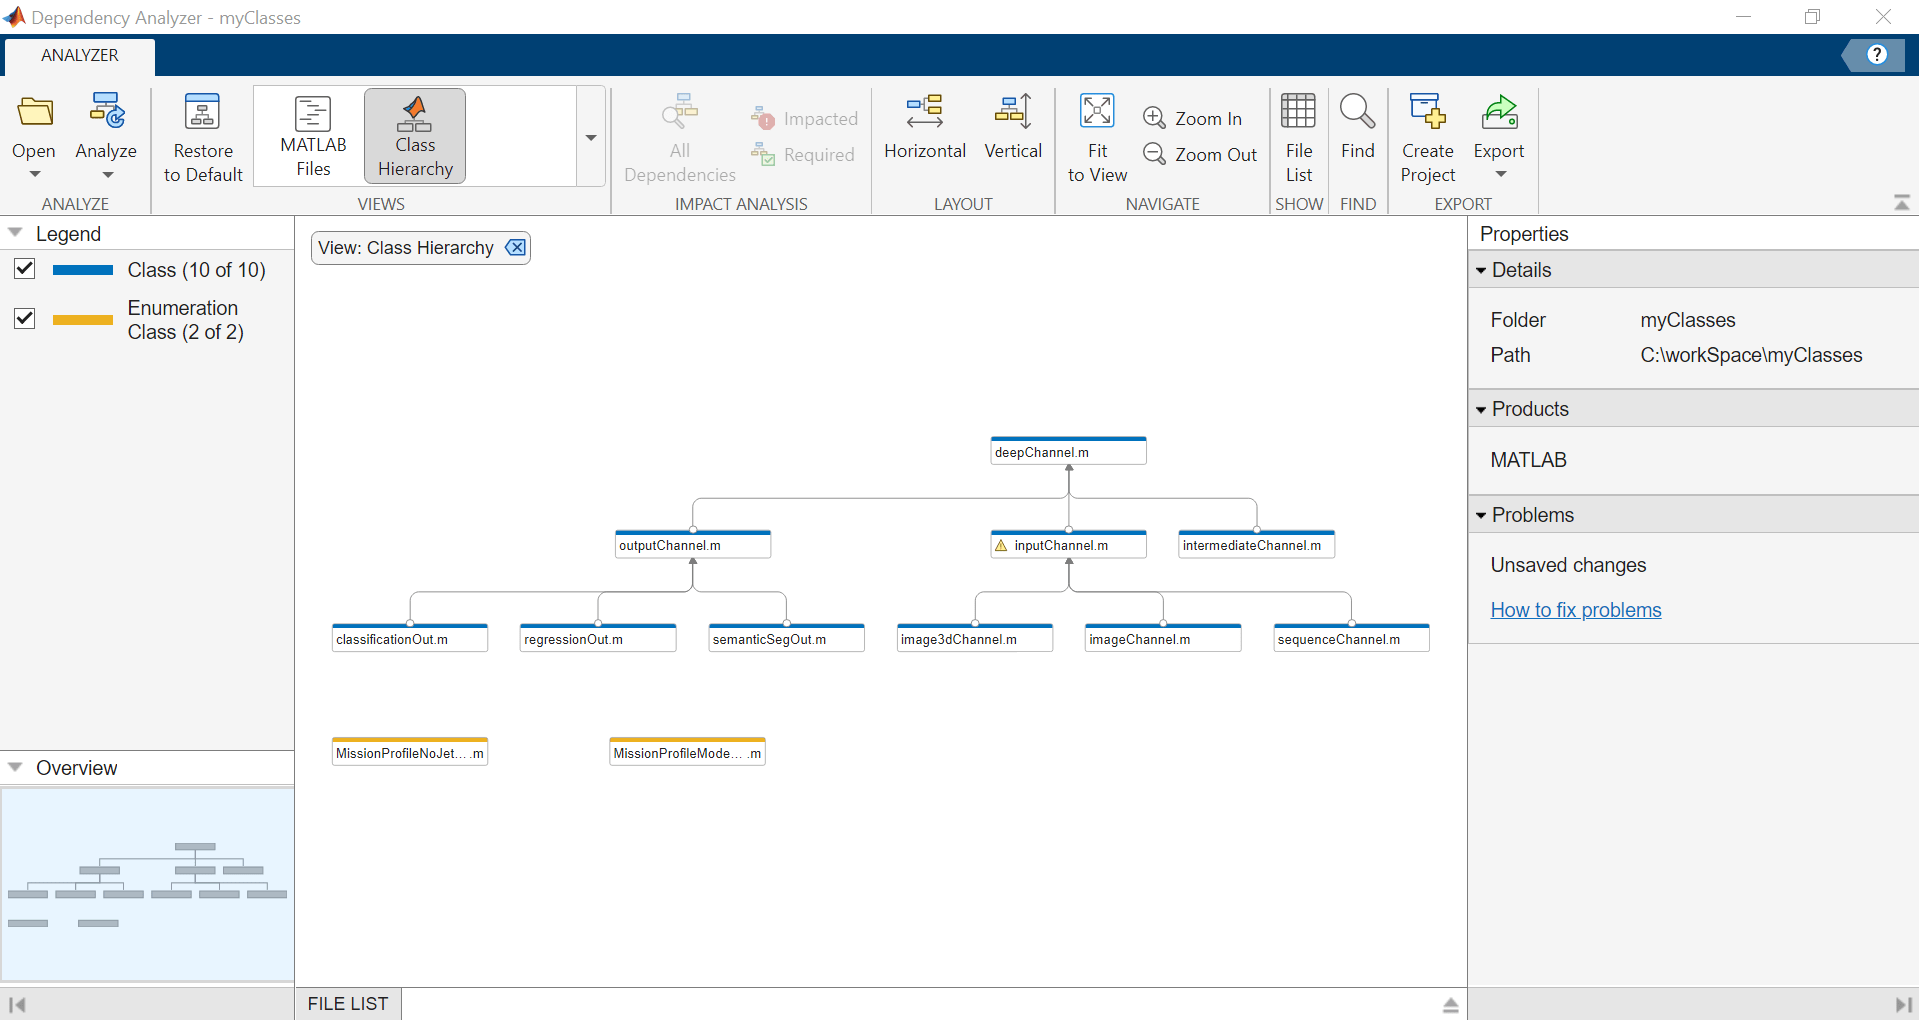 Dependency Analyzer app. Dependency graph in the center. toolstrip on the top, Legend pane on the left, and Properties panel on the right.